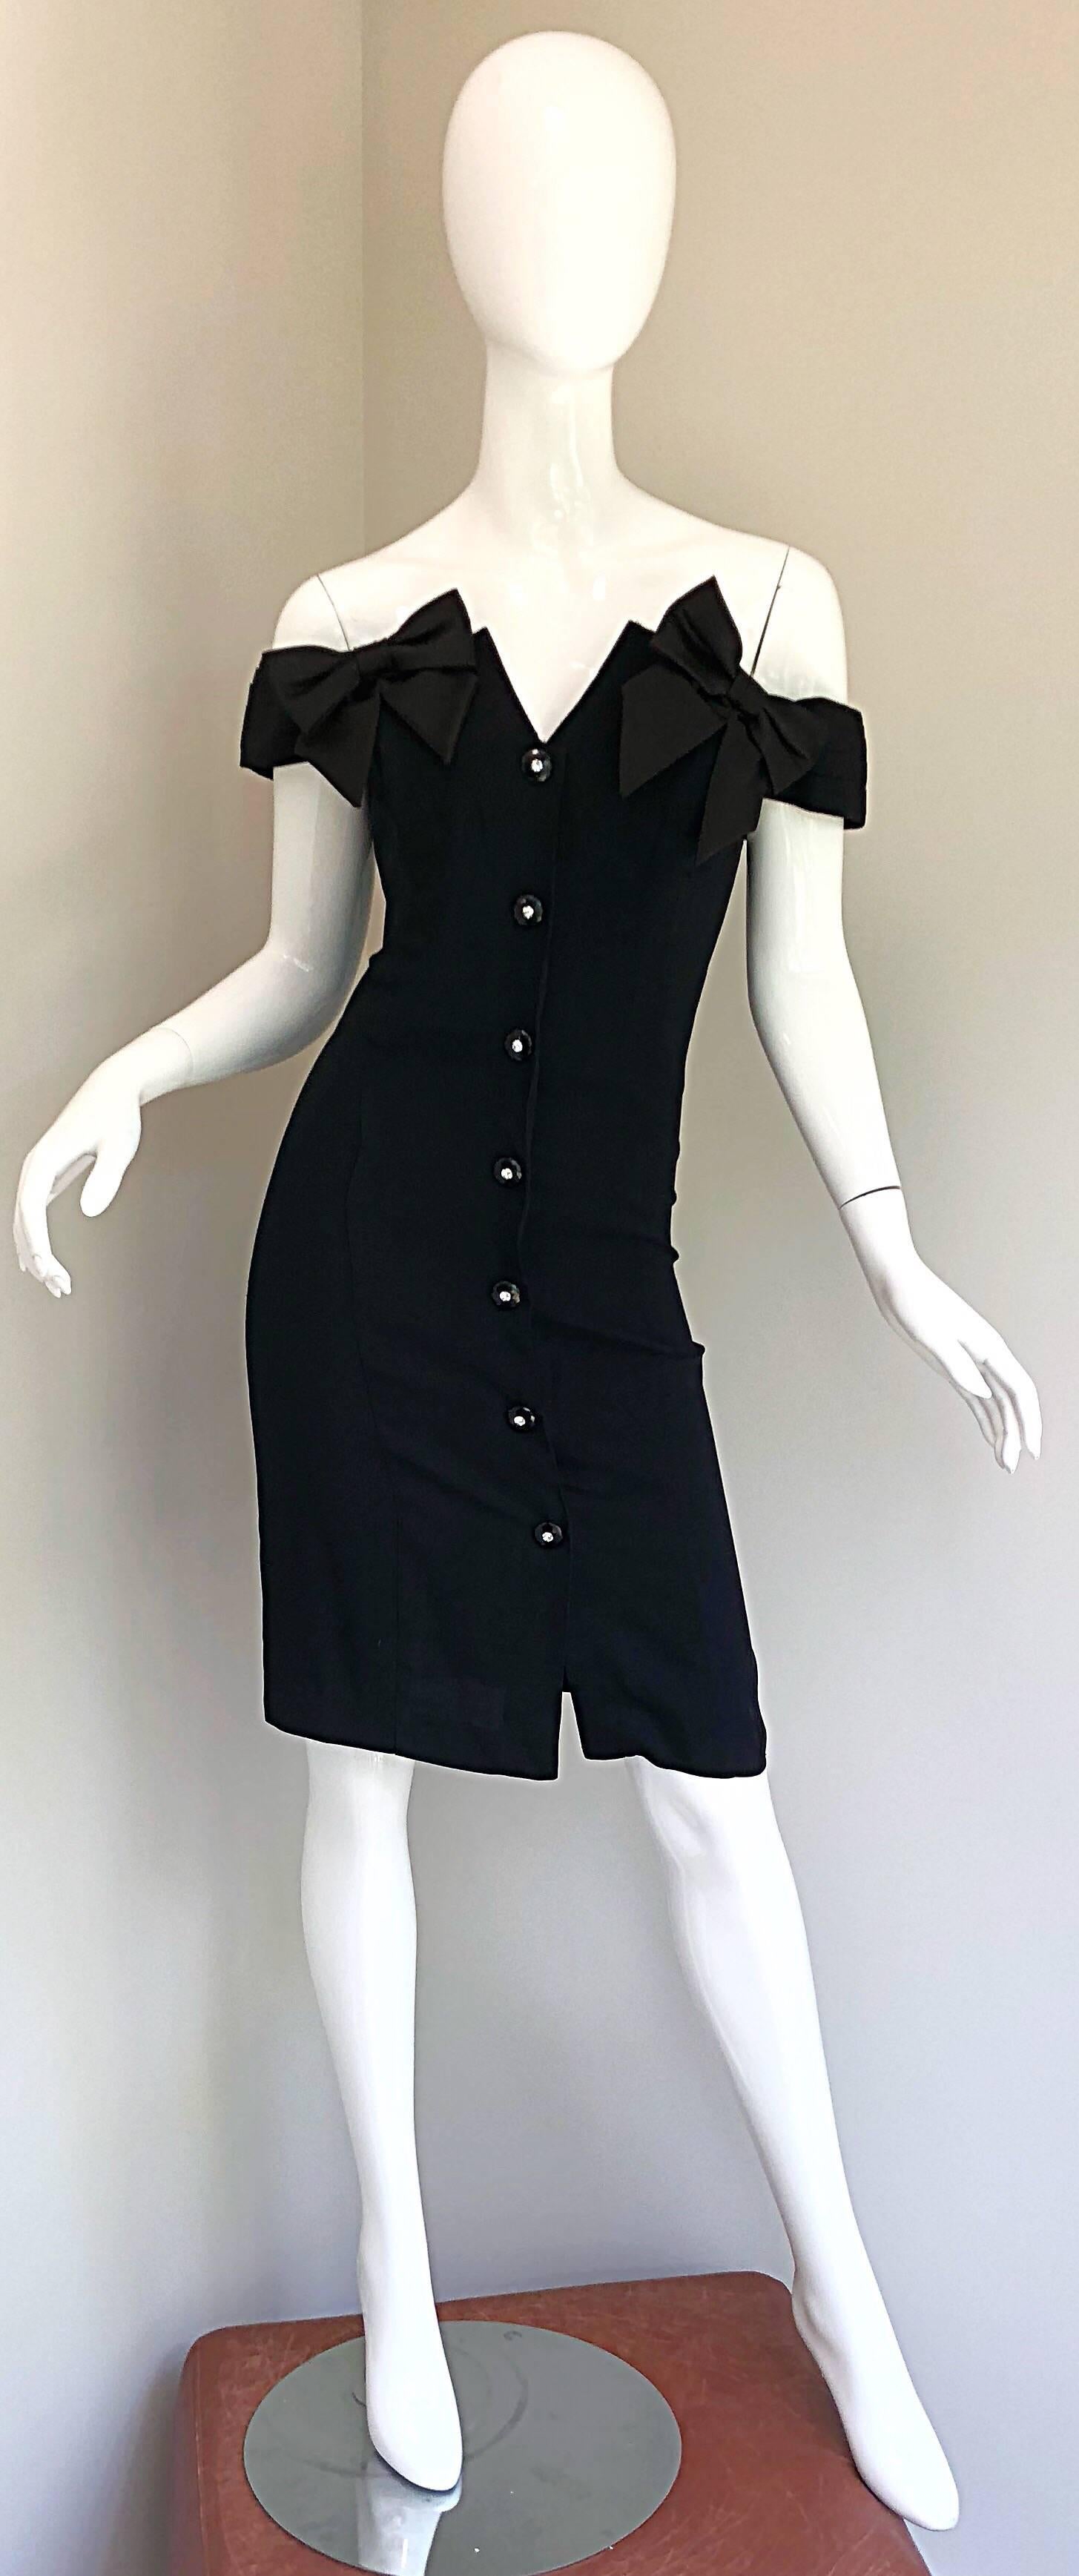 Sexy 90s off-the-shoulder Avant Garde little black dress LBD ! Features black lacquer / rhinestone buttons up the front. Bow details at each shoulder. Wonderful flattering bodycon fit hugs the body in all the right places. Hidden zipper up the back